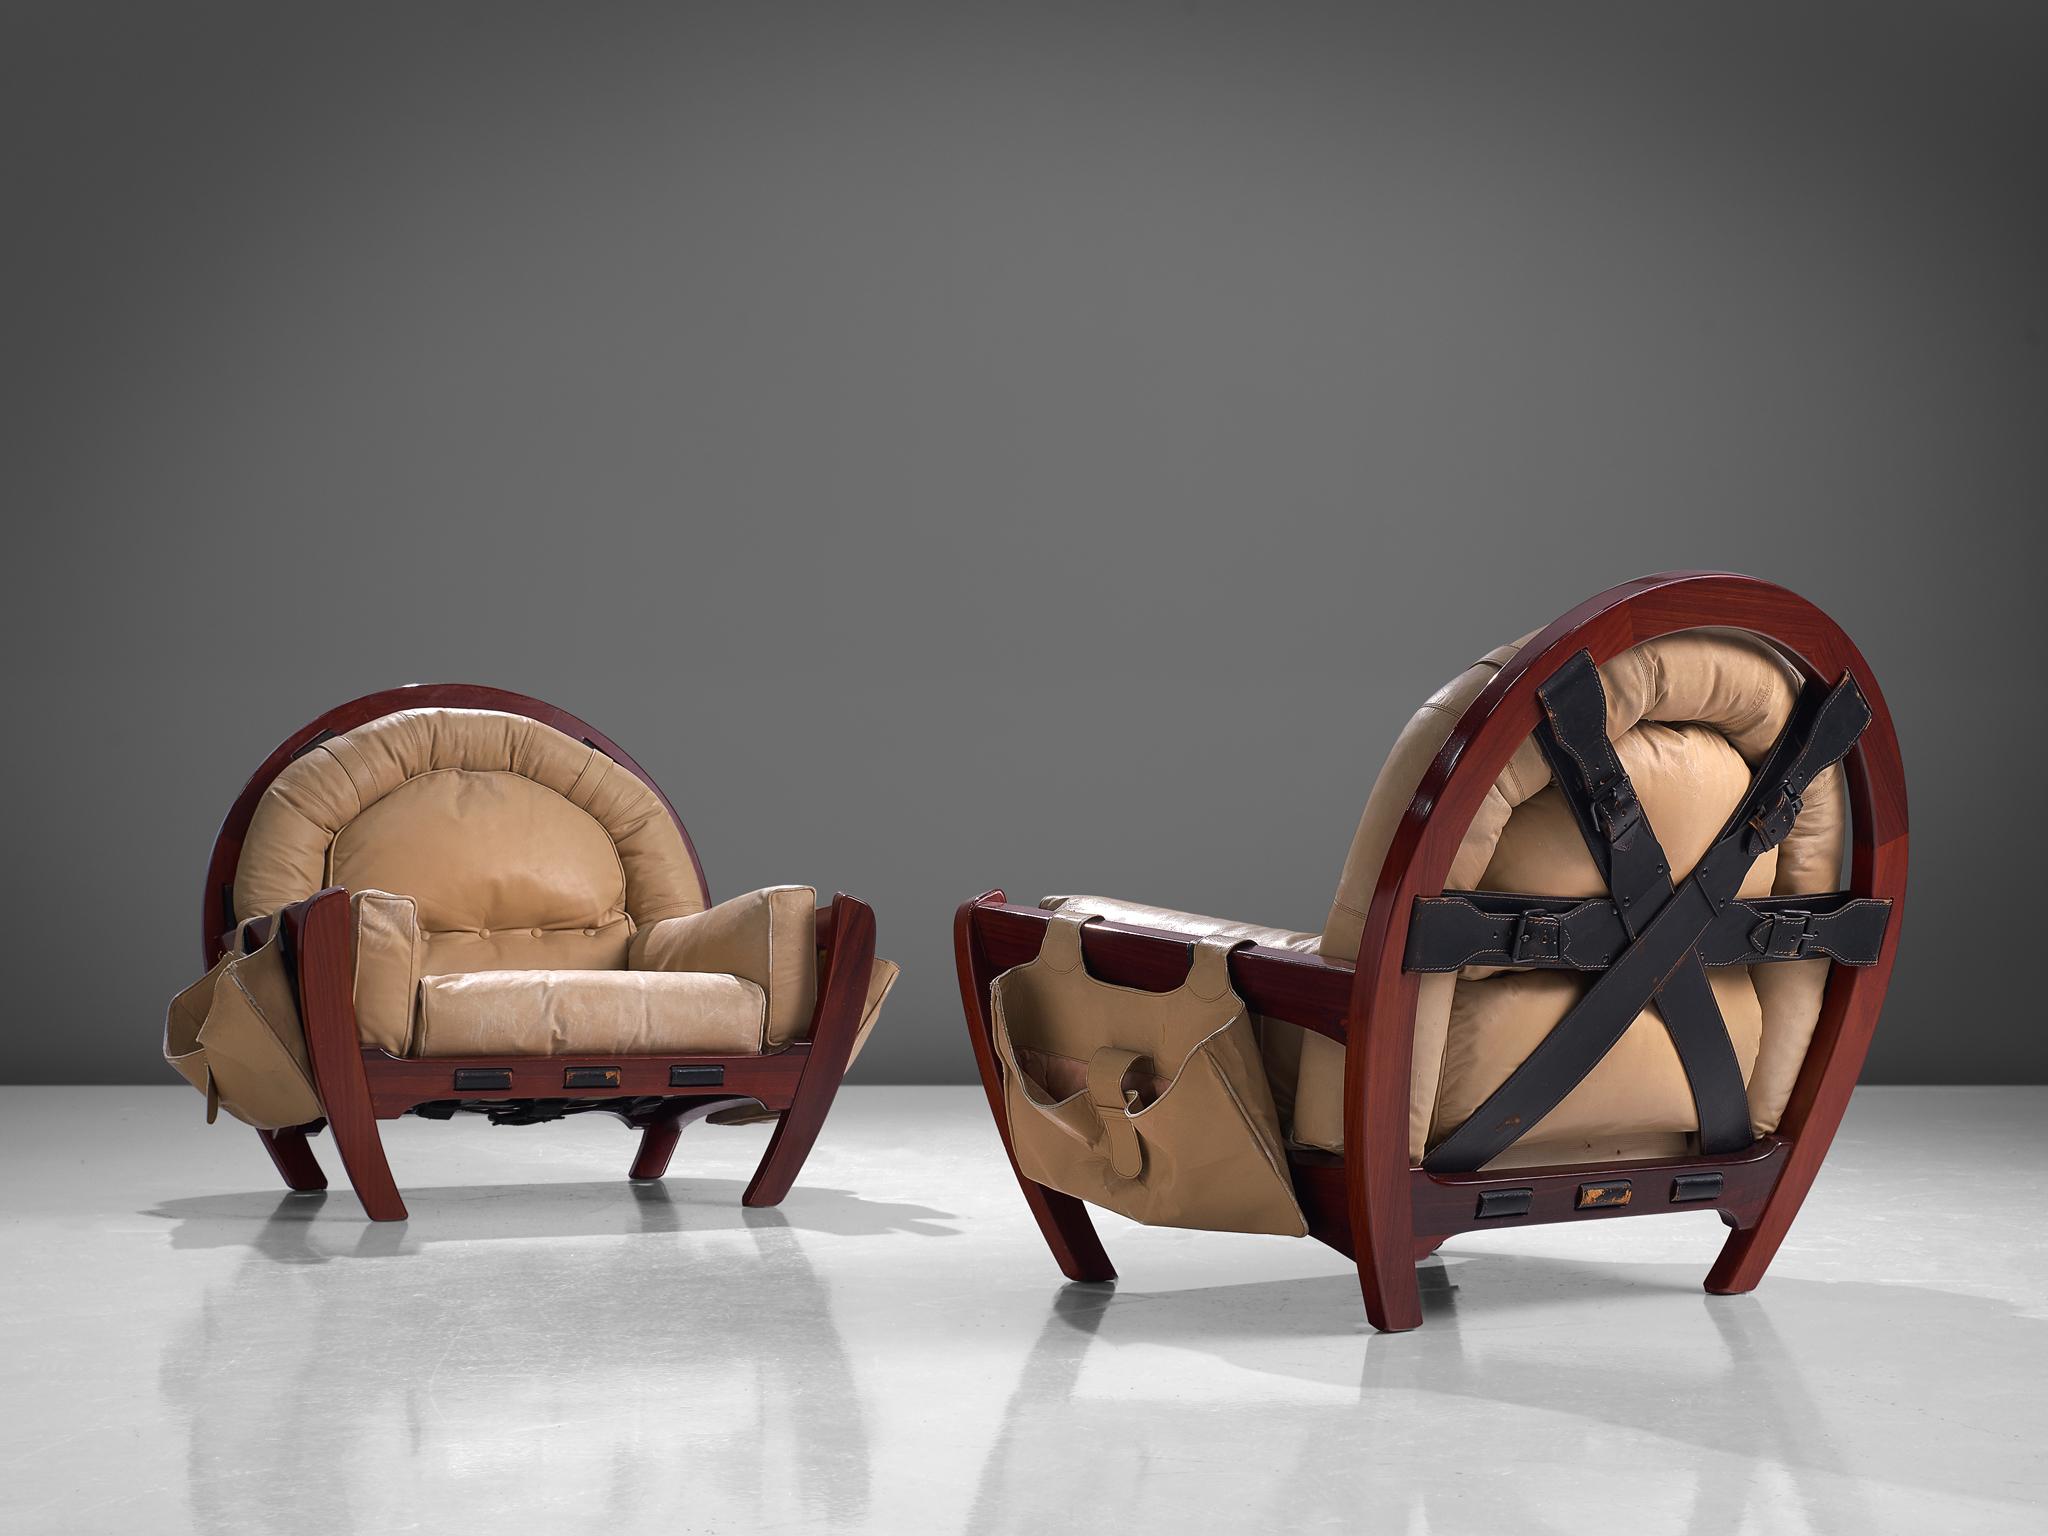 Luciano Frigerio, pair of lounge chairs model 'Rancero', mahogany and leather, Italy, 1970s.

A pair of 'Rancero' lounge chairs with red stained wooden frames, designed by the Italian Luciano Frigerio. This model is also called 'The Throne for the